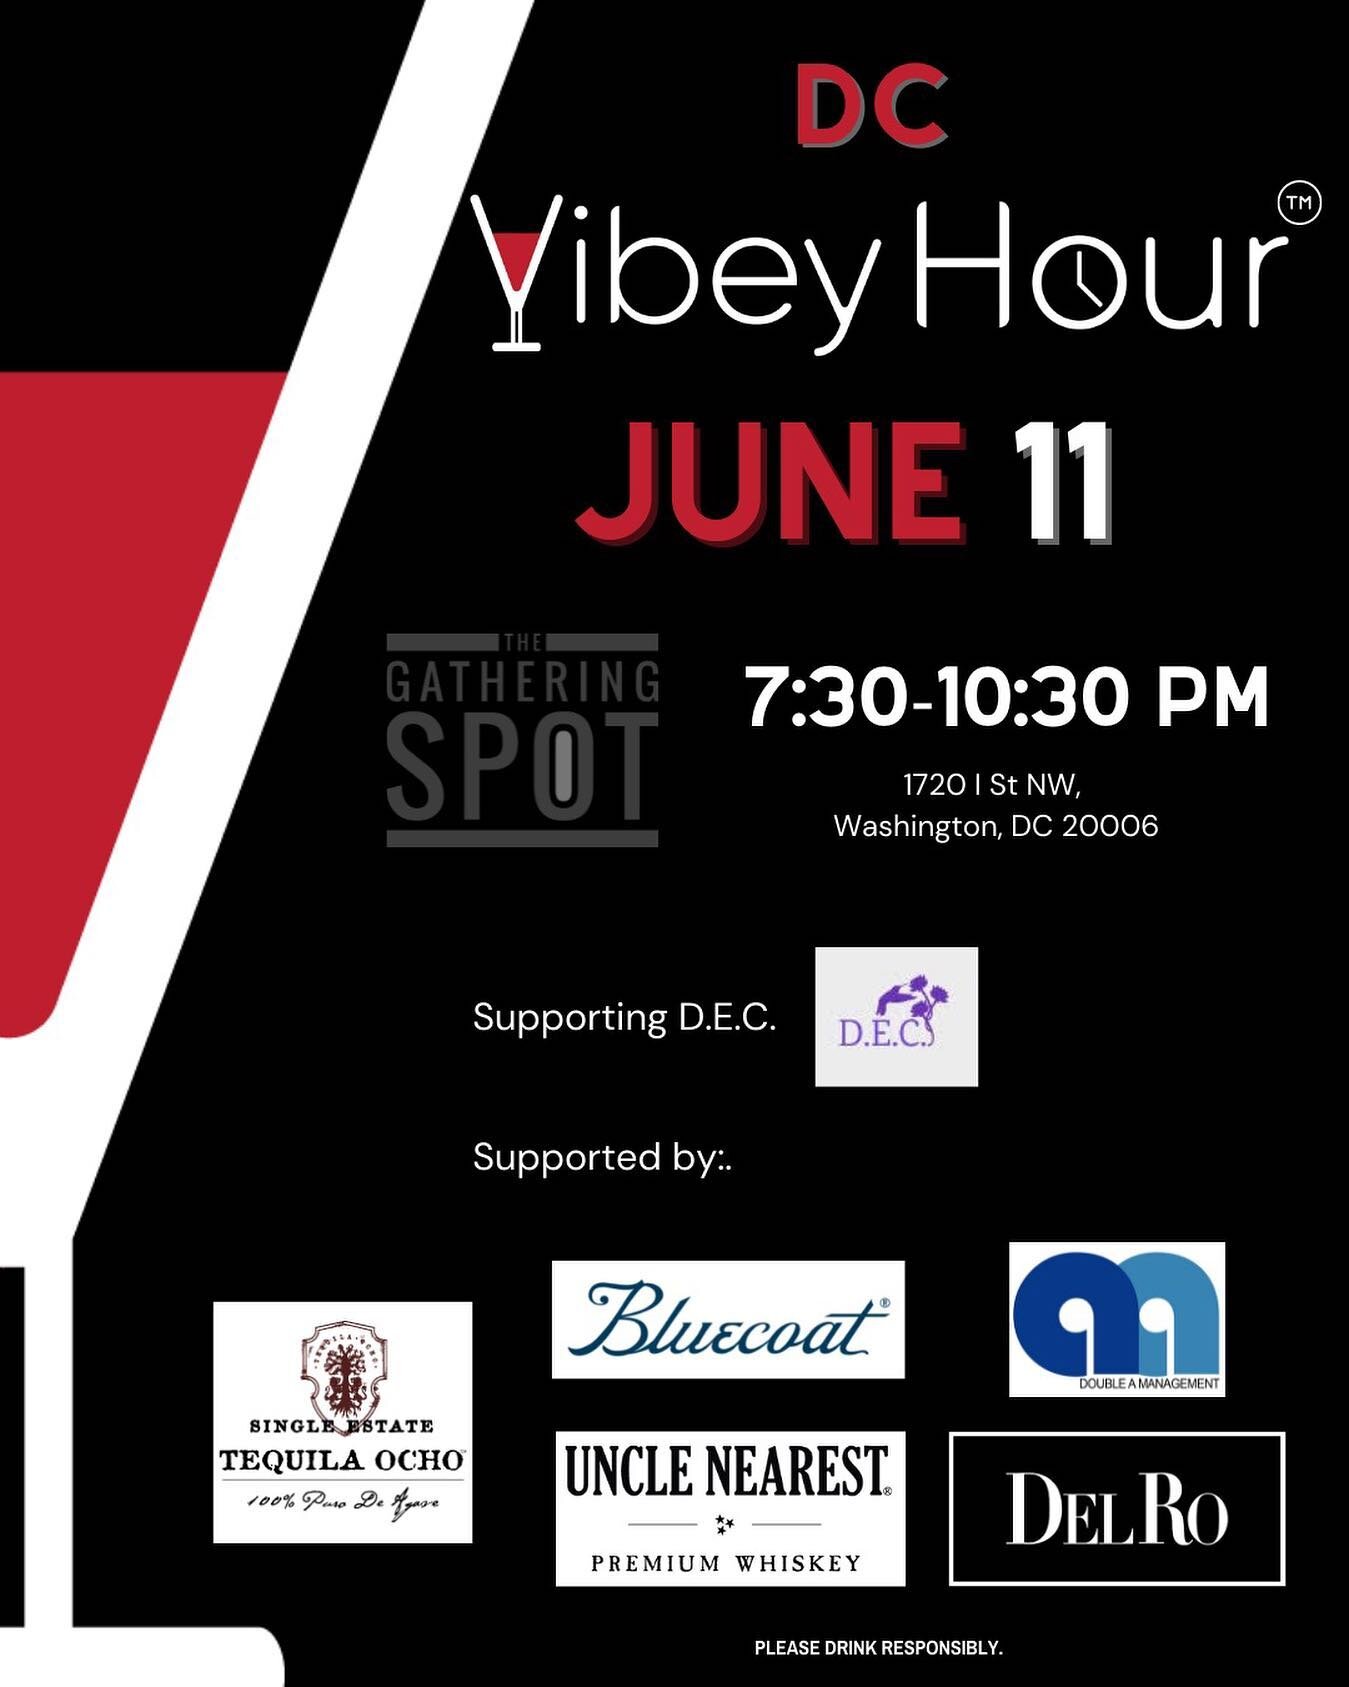 Vibey Hour&trade;️ D.C. is up next! 

🔺
🔹
🔺
🔹 
🔺
If you&rsquo;re in the DMV, this Vibey Hour is supporting educators! 
🔹
🔺 
🔹
🔺

#VibeyHour #Events #DMV #TheGatheringSpot 
#SupportEducators 
#BringYourVisionToLife #EventPlanning  #Projectman